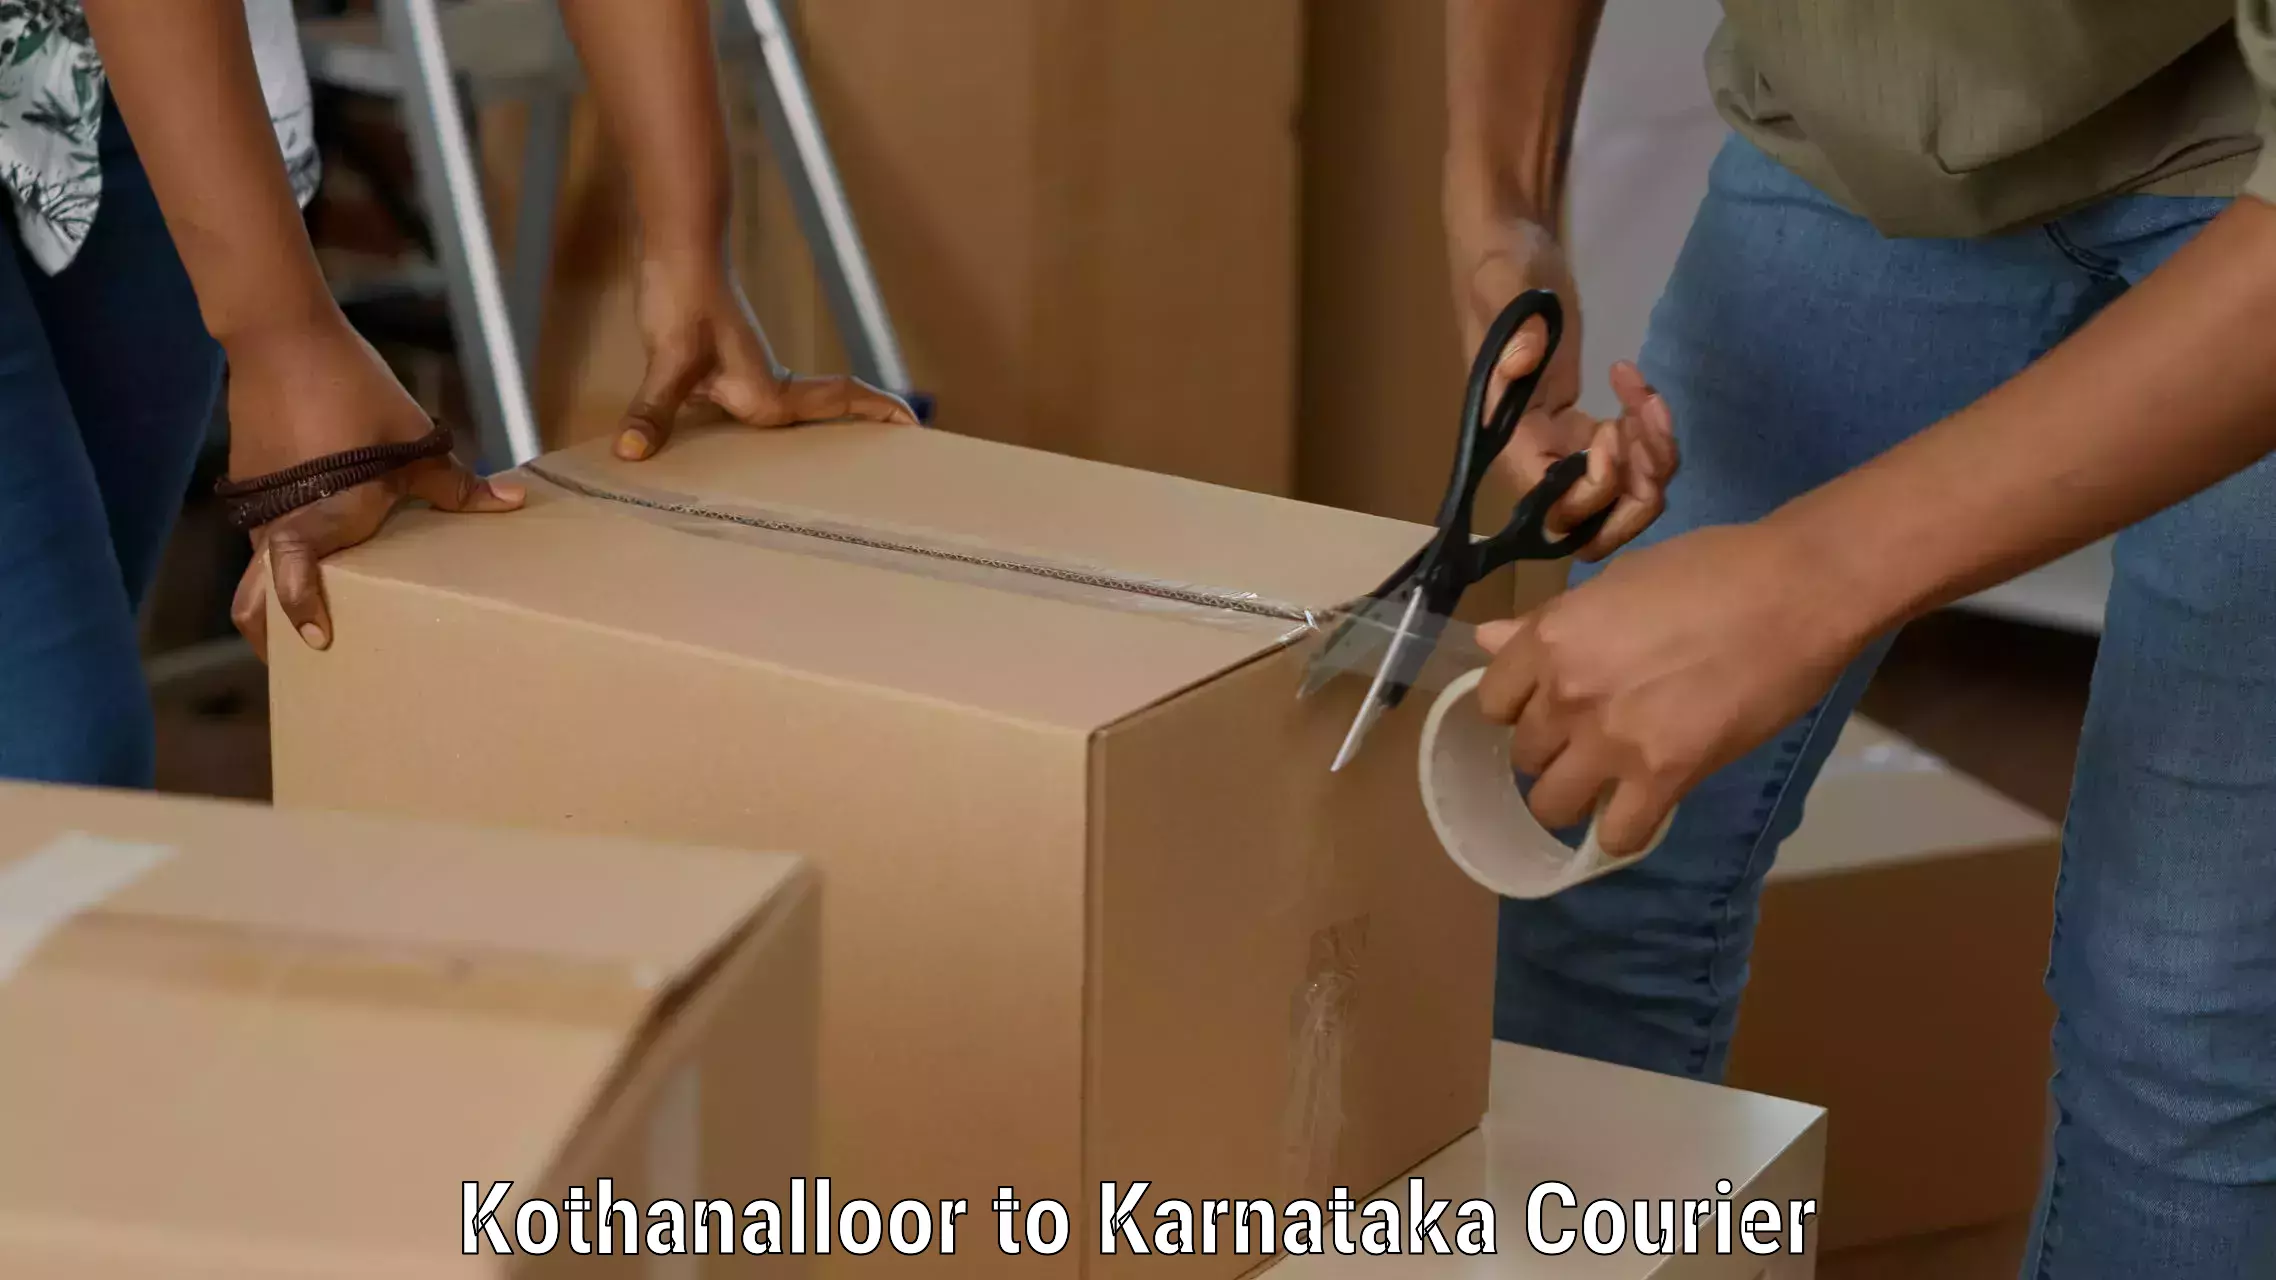 Reliable delivery network Kothanalloor to Yellare